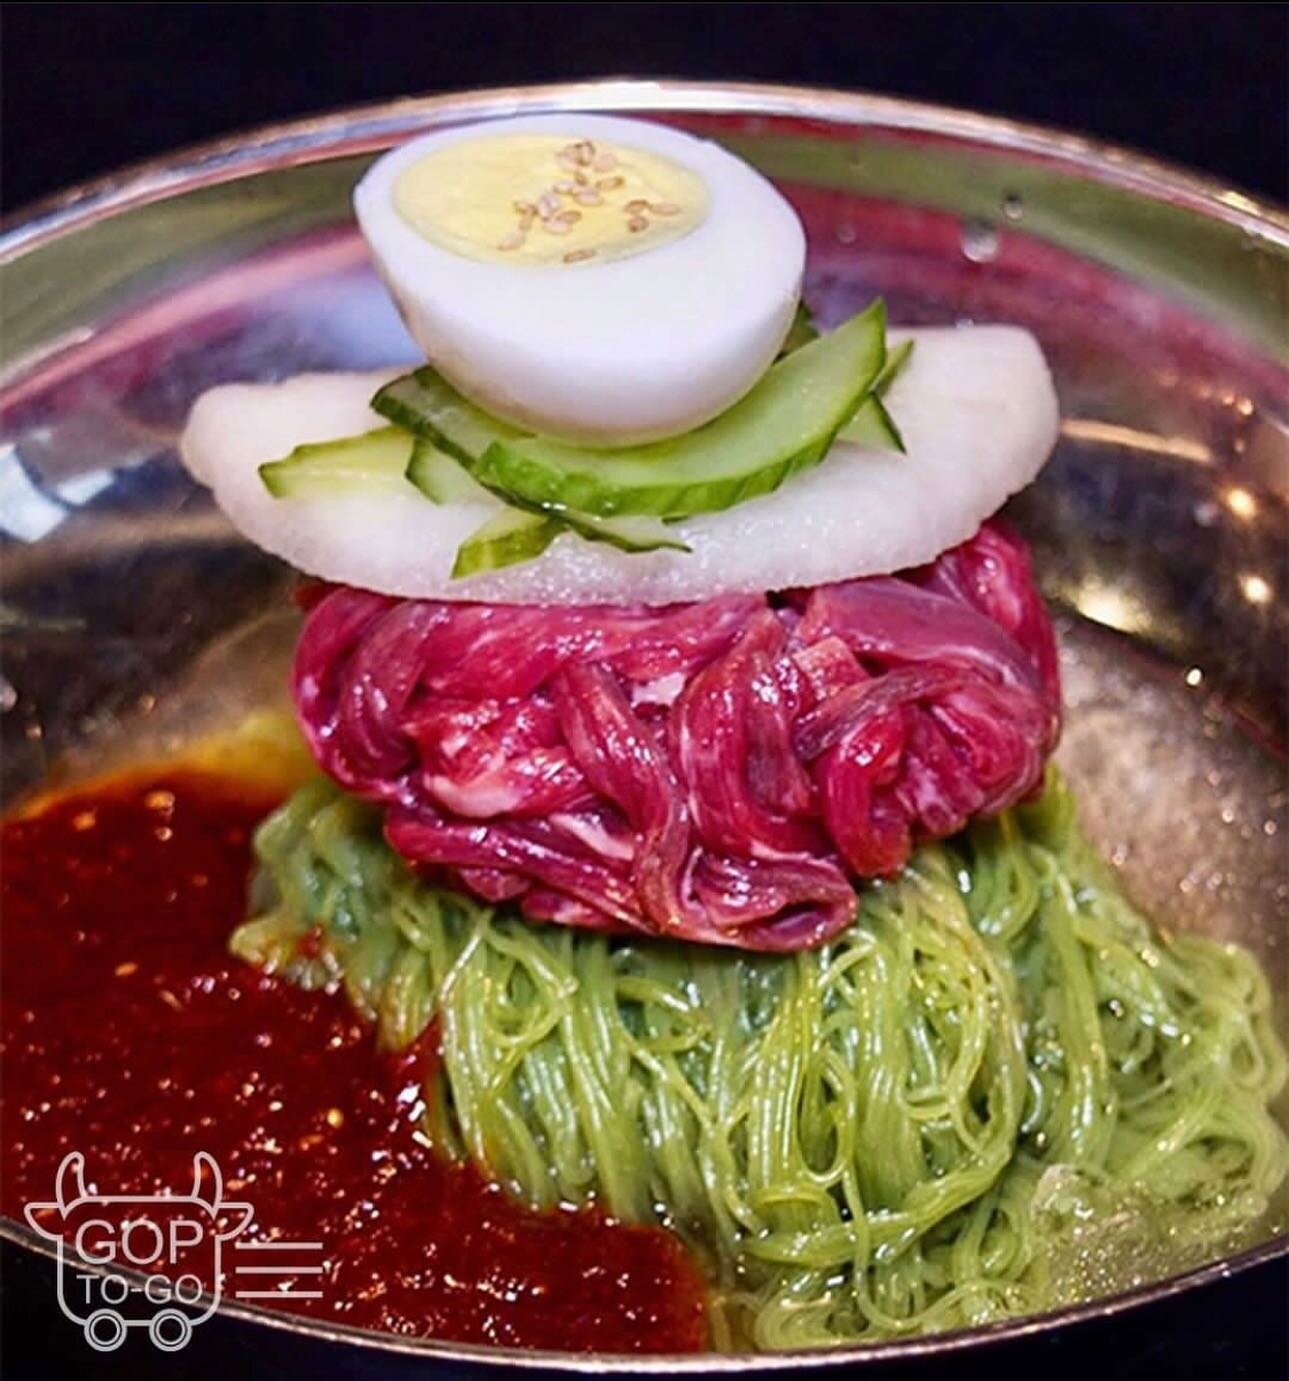 Beef Tartare Naeng Myeon and it&rsquo;s parents on the next to slides 🥰
-
Have you ever tried our twist on classic naeng myeon? 😛
-

👆Order on our website(link in bio)!
✅ Free delivery if you order $60 or more.